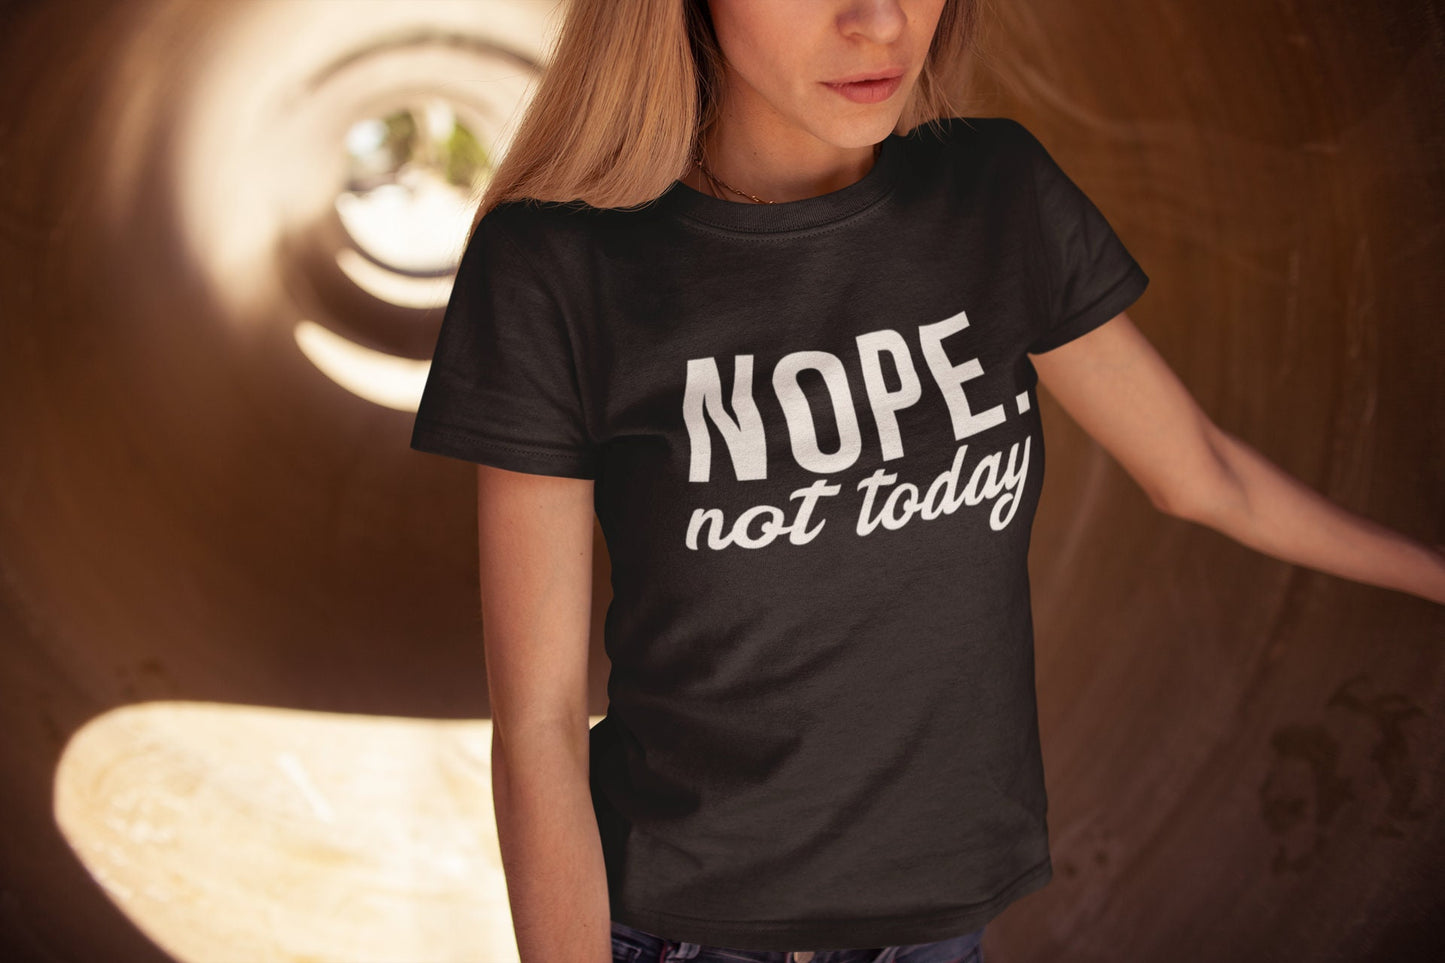 Nope Not Today Shirt, Funny Adult Shirt, Funny Graphic Tee, Humor Tee, Sarcastic Shirt, Unisex Shirt